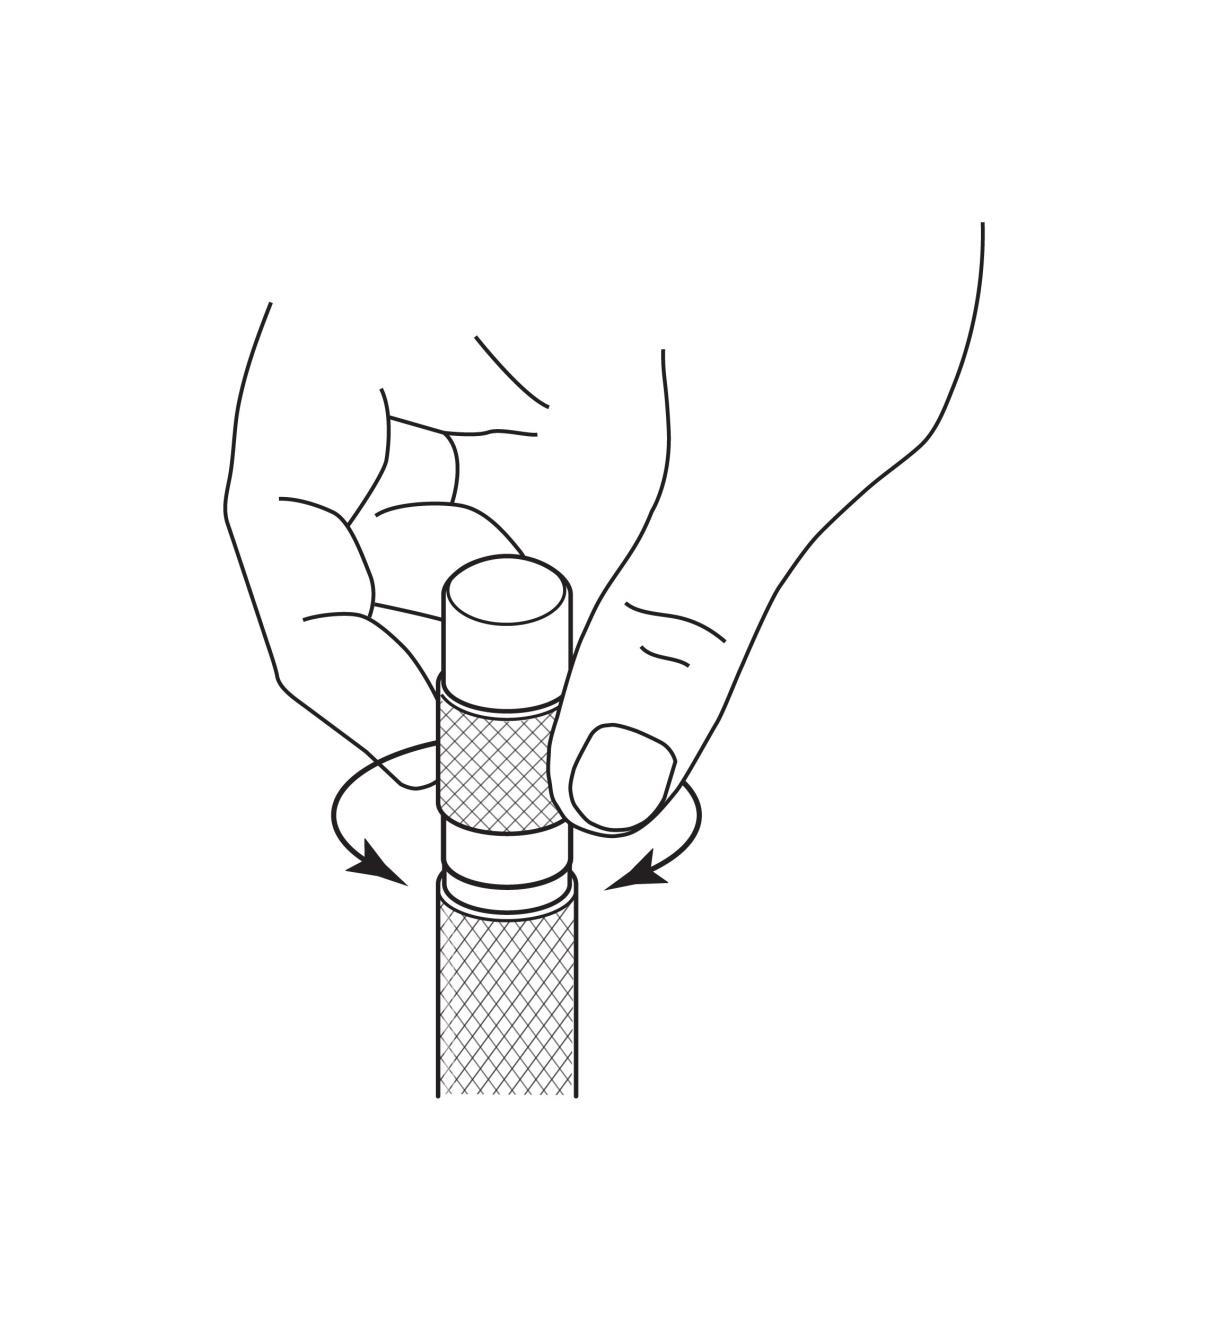 Illustration showing how to adjust tension by turning the barrel